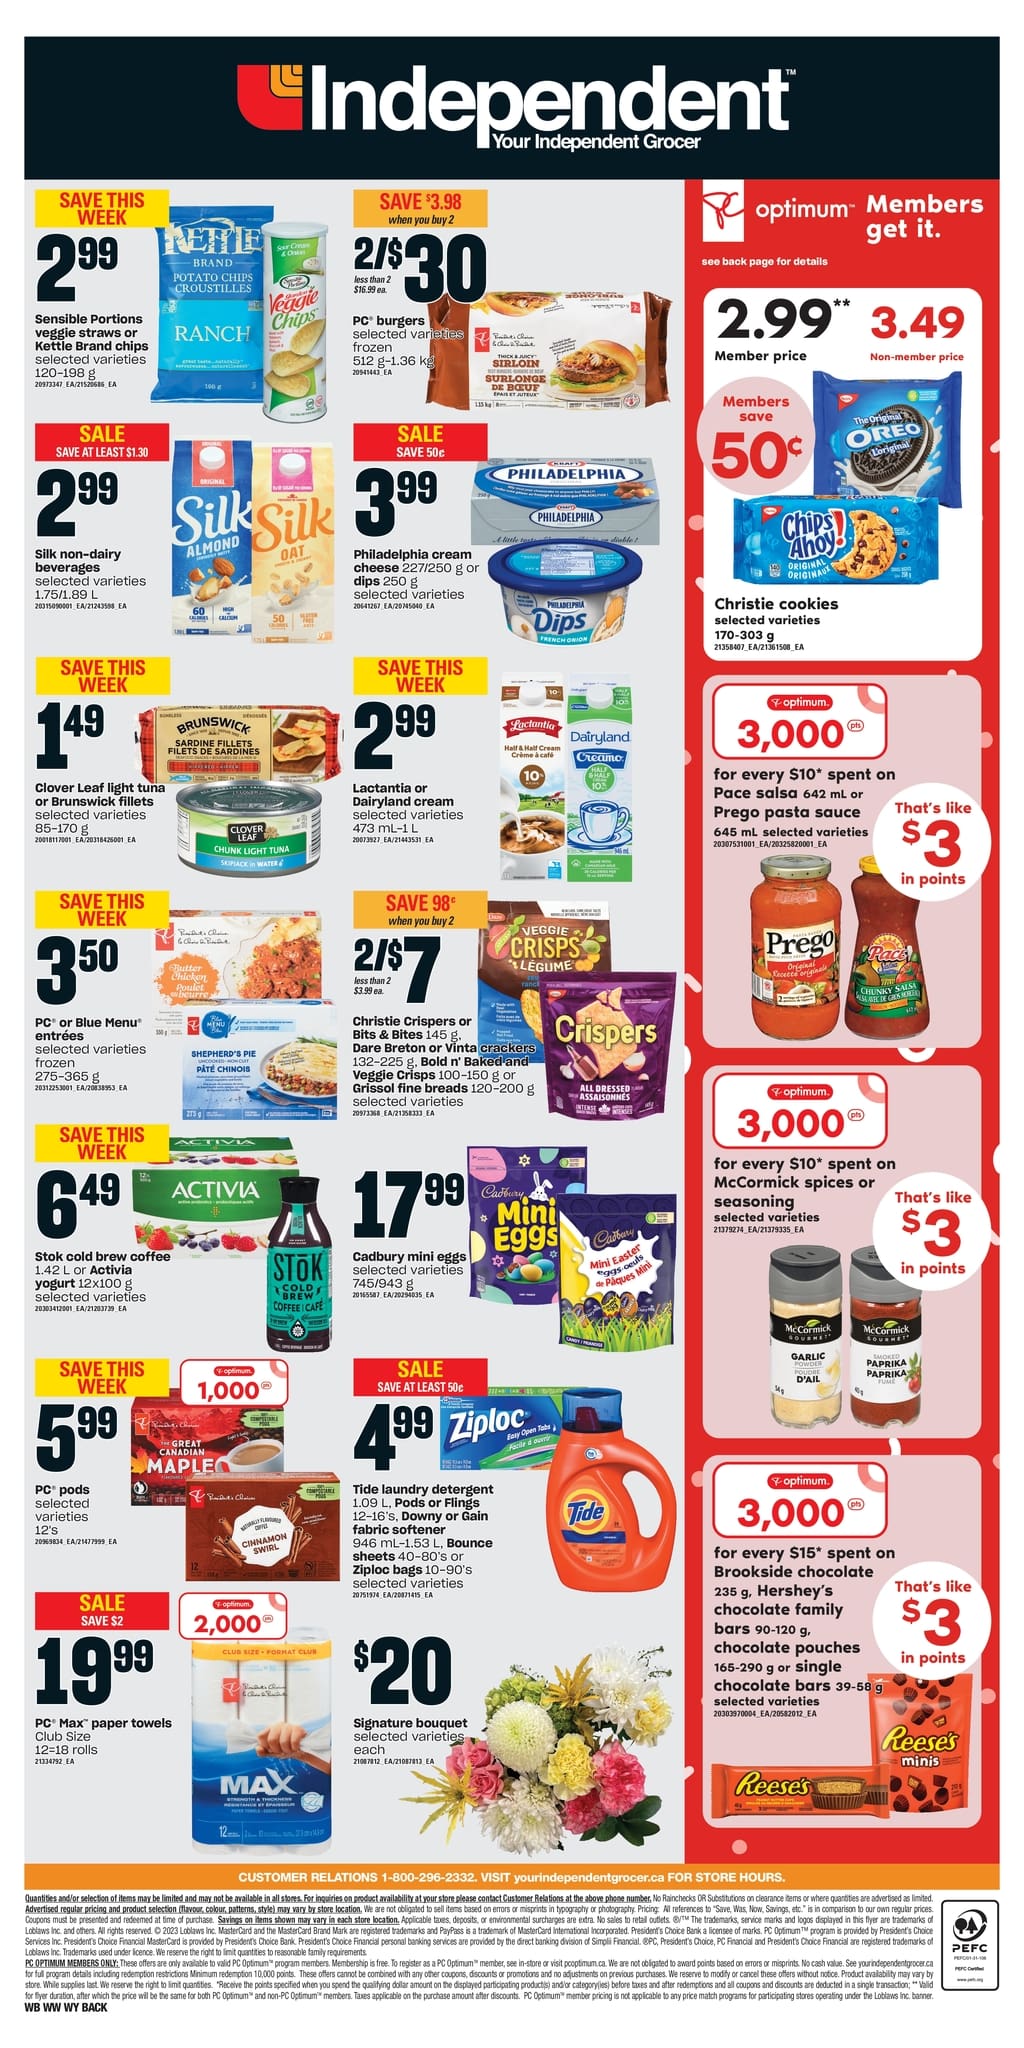 Independent - Western Canada - Weekly Flyer Specials - Page 4